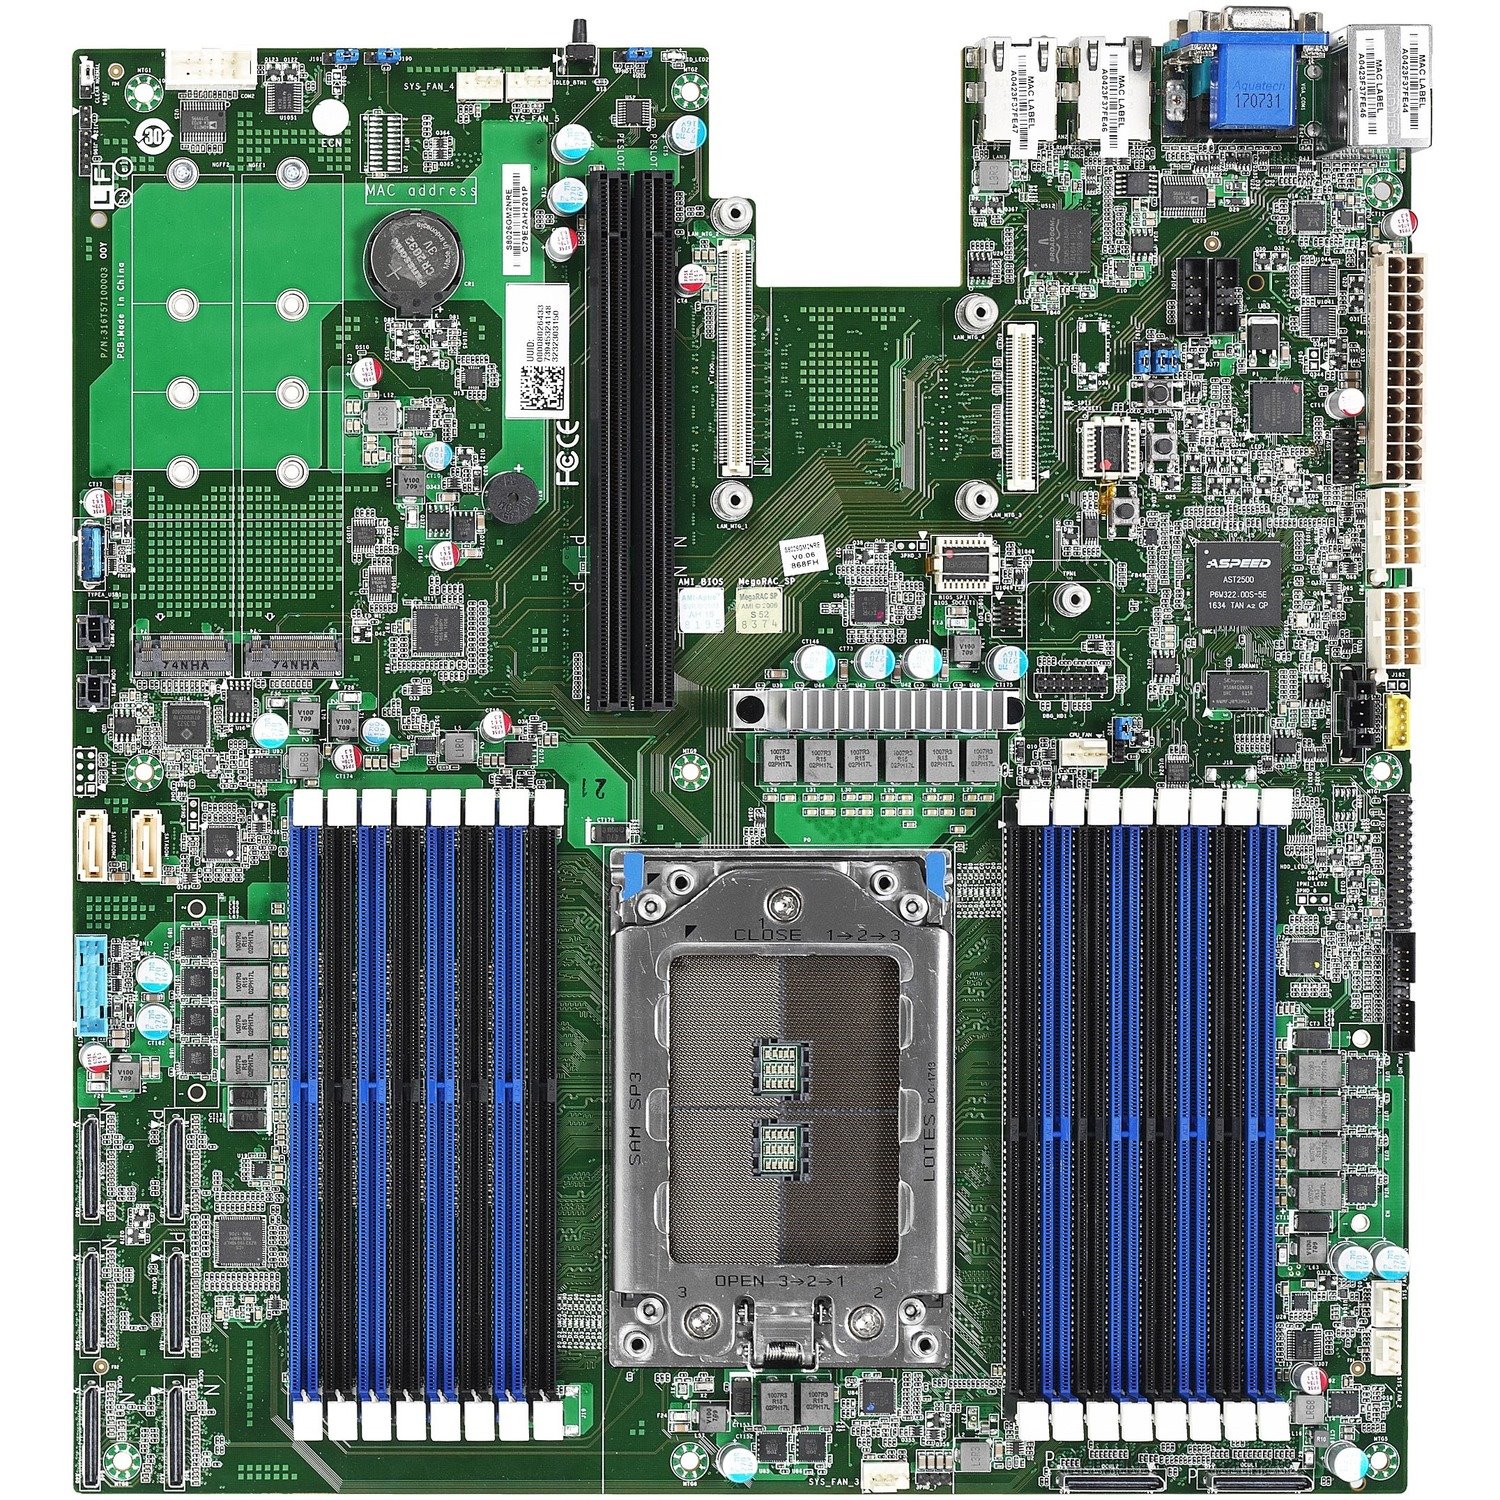 Tyan Tomcat SX S8026 Server Motherboard - AMD Chipset - Socket SP3 - Extended ATX